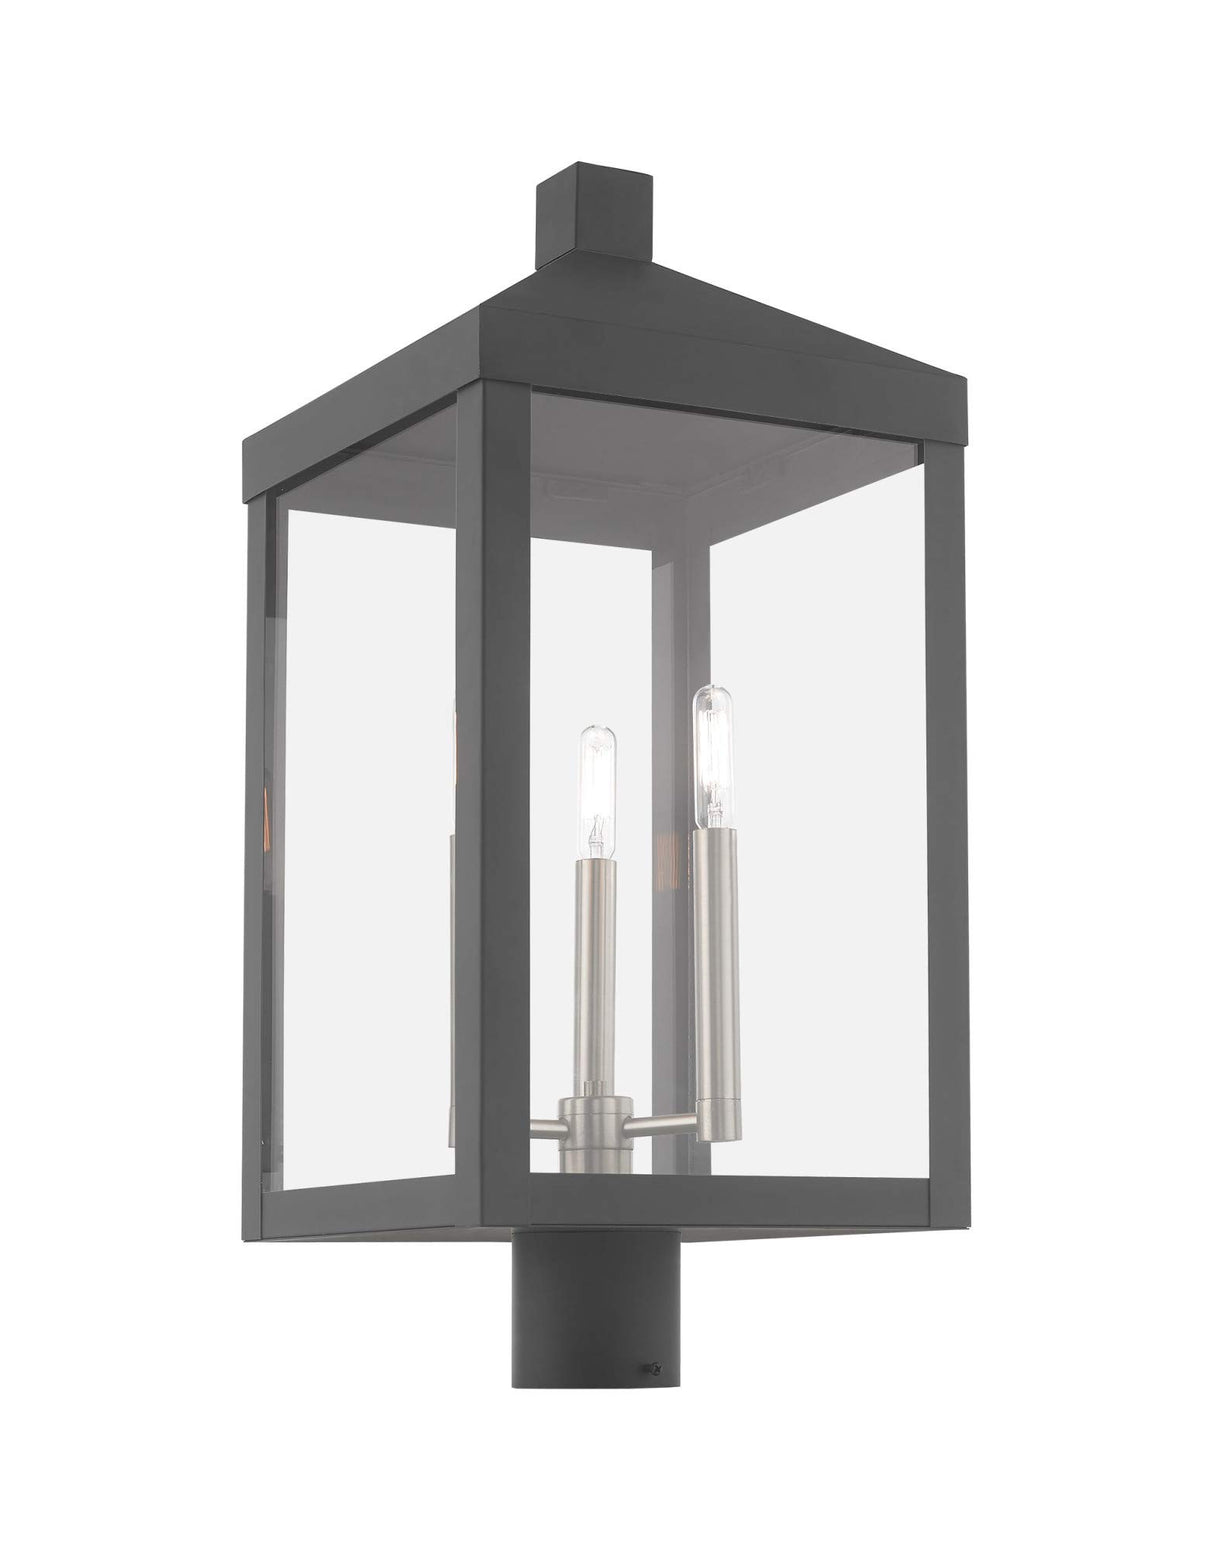 Livex Lighting 20586-91 Transitional Three Light Post-Top Lanterm from Nyack Collection in Pwt, Nckl, B/S, Slvr. Finish, 10.50 inches, Medium, Brushed Nickel